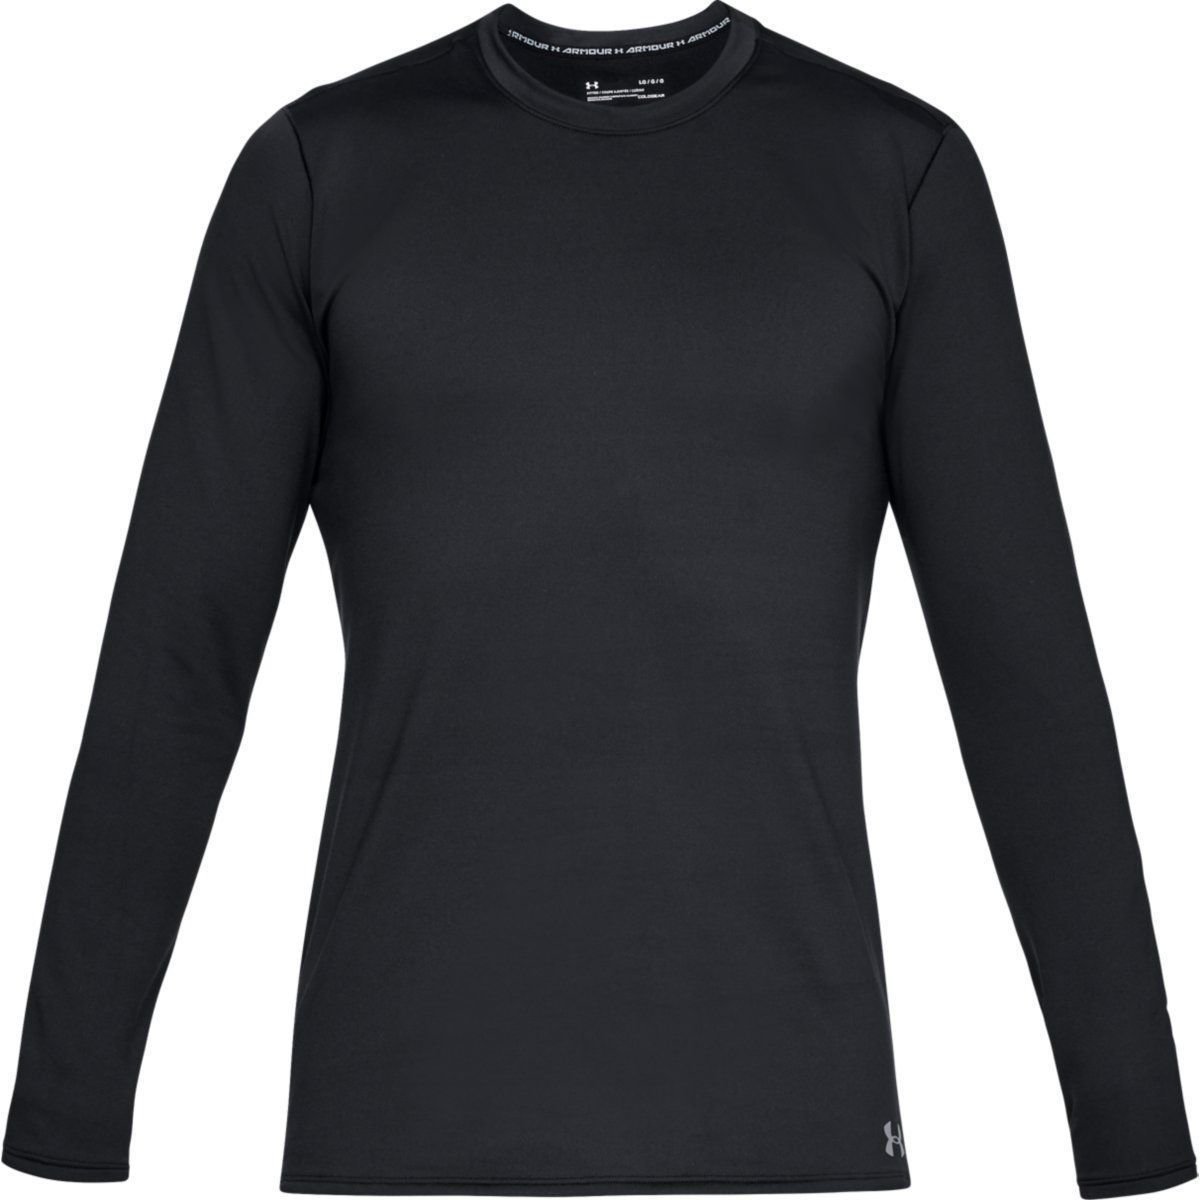 Thermal Clothing Under Armour Fitted CG Crew Black 2XL